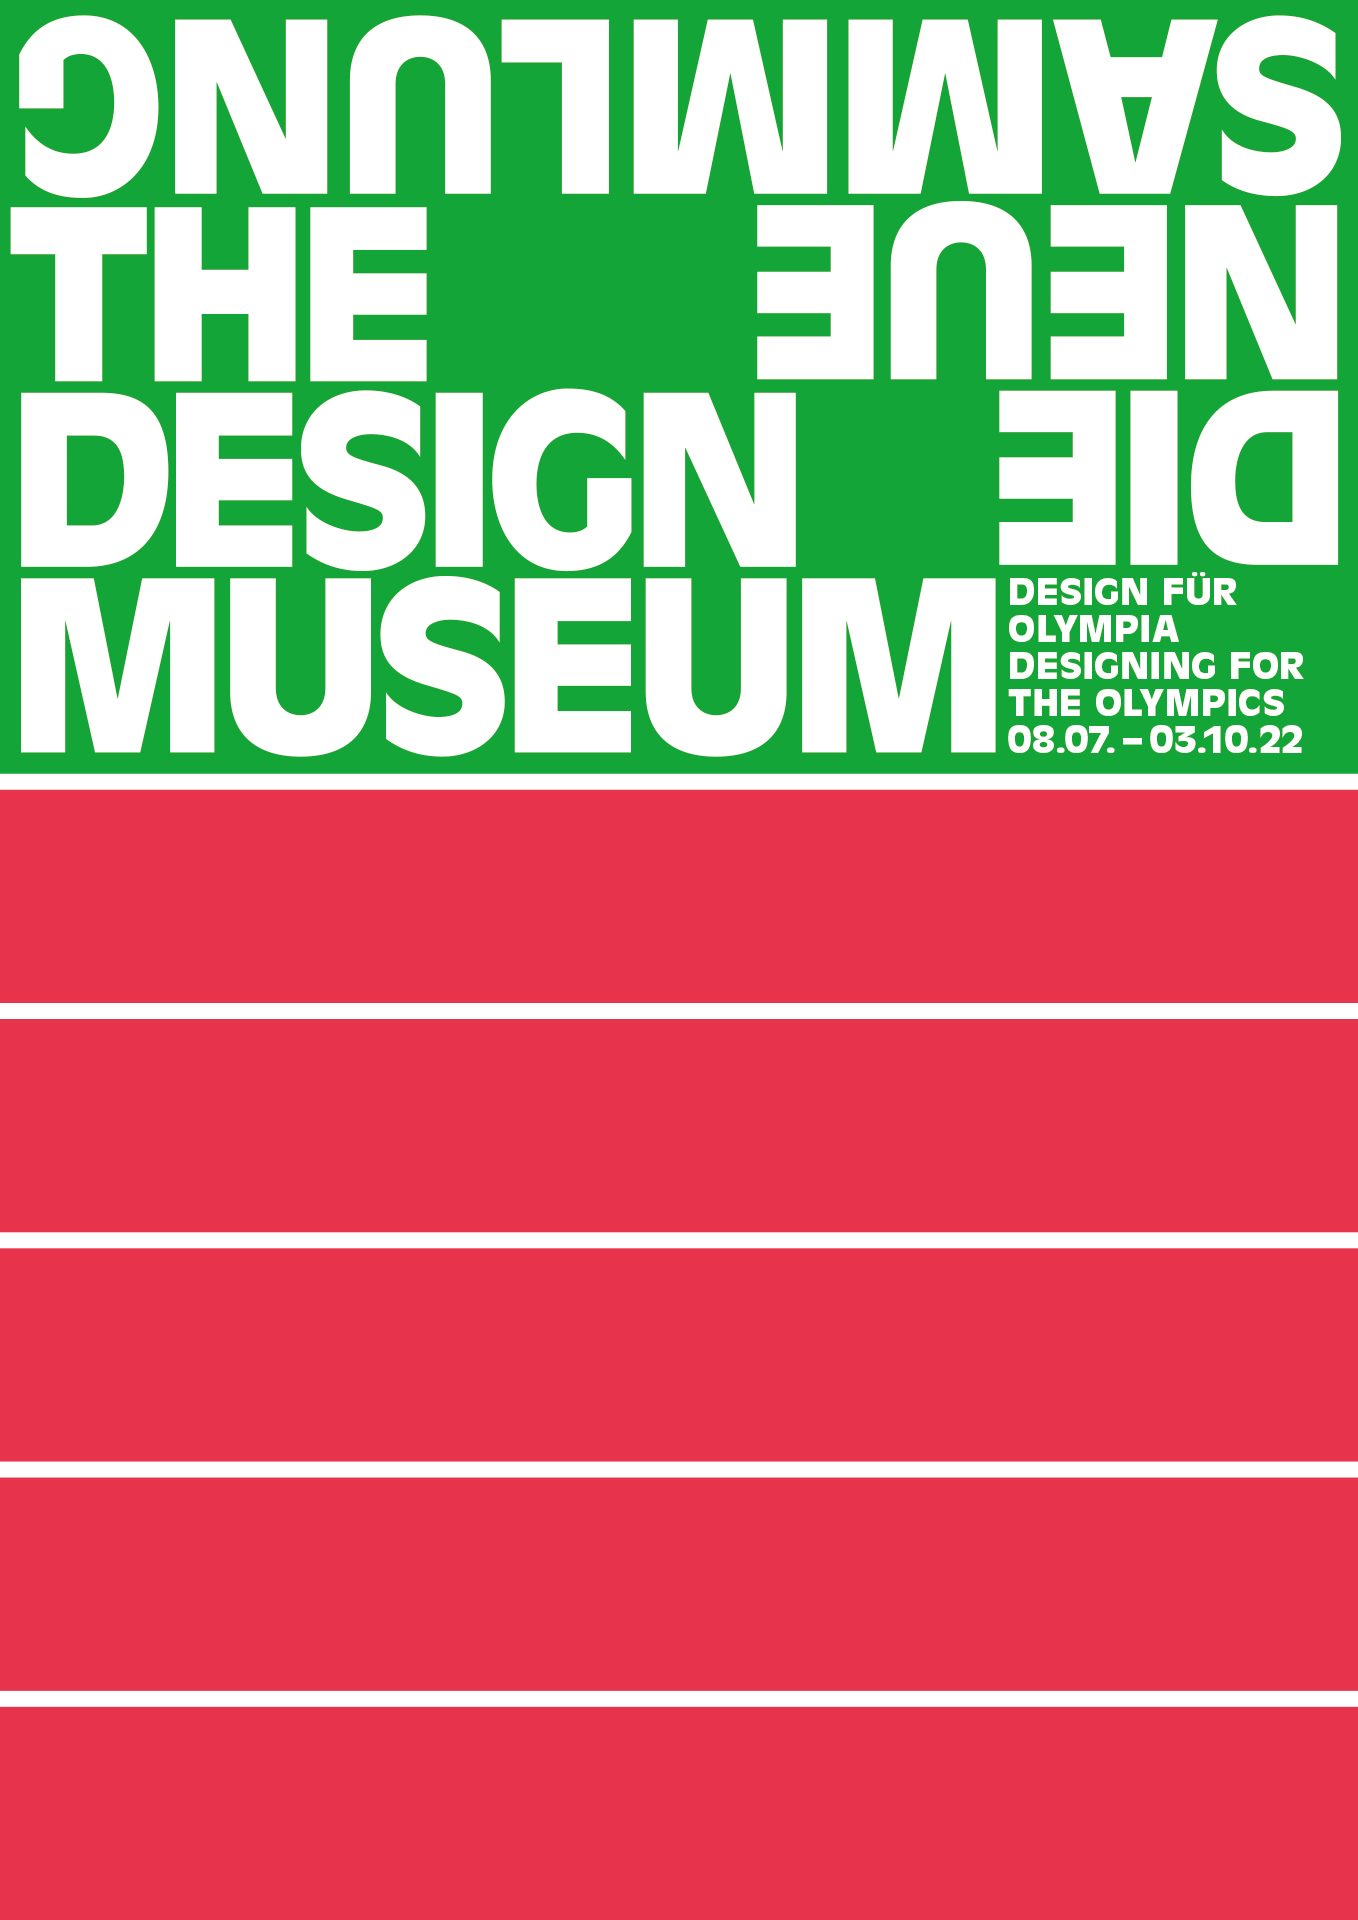 Exhibition poster. The green logo of Die Neue Sammlung with title and exhibition period in the bottom right corner. Below that are five red bars